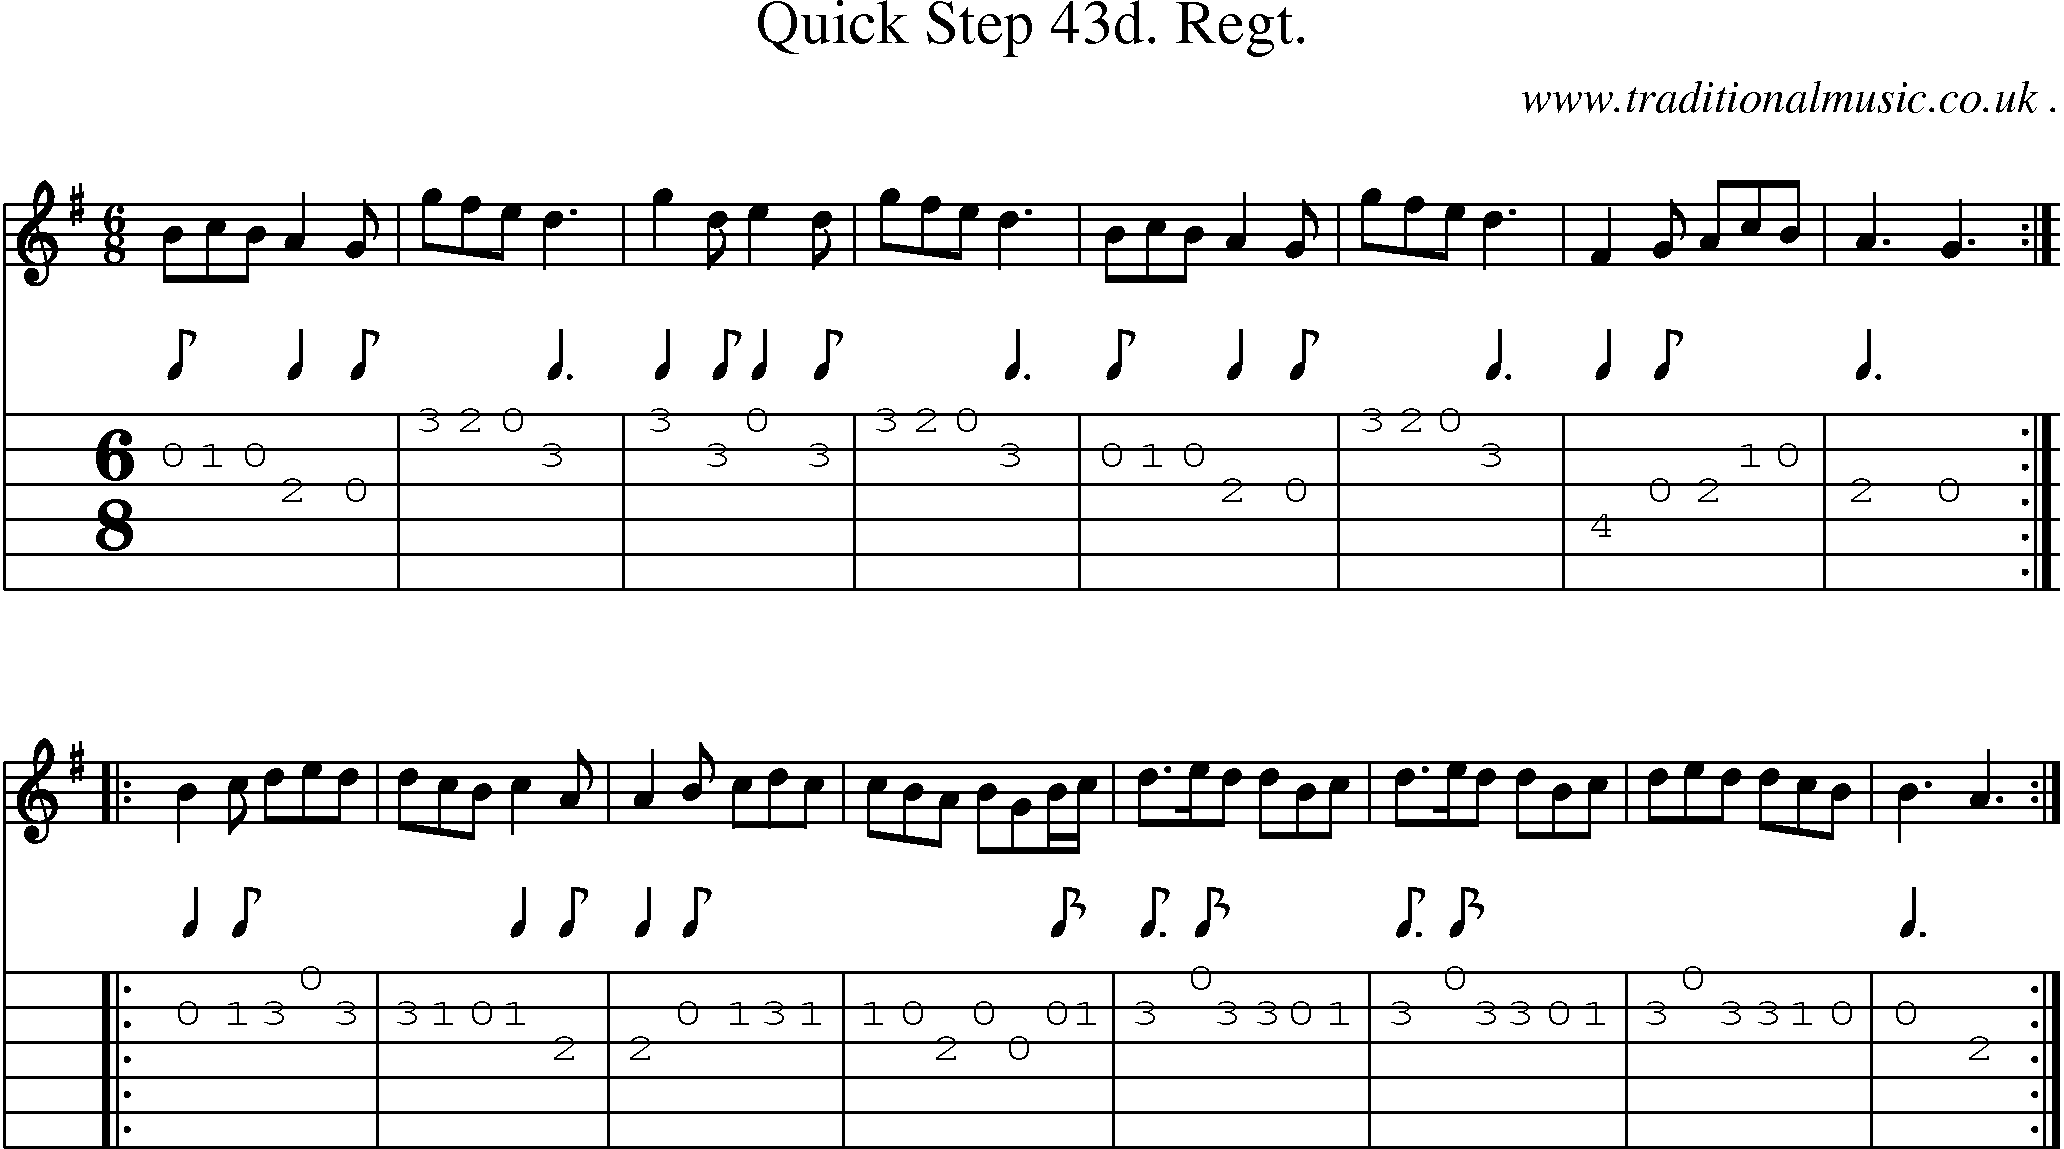 Sheet-Music and Guitar Tabs for Quick Step 43d Regt